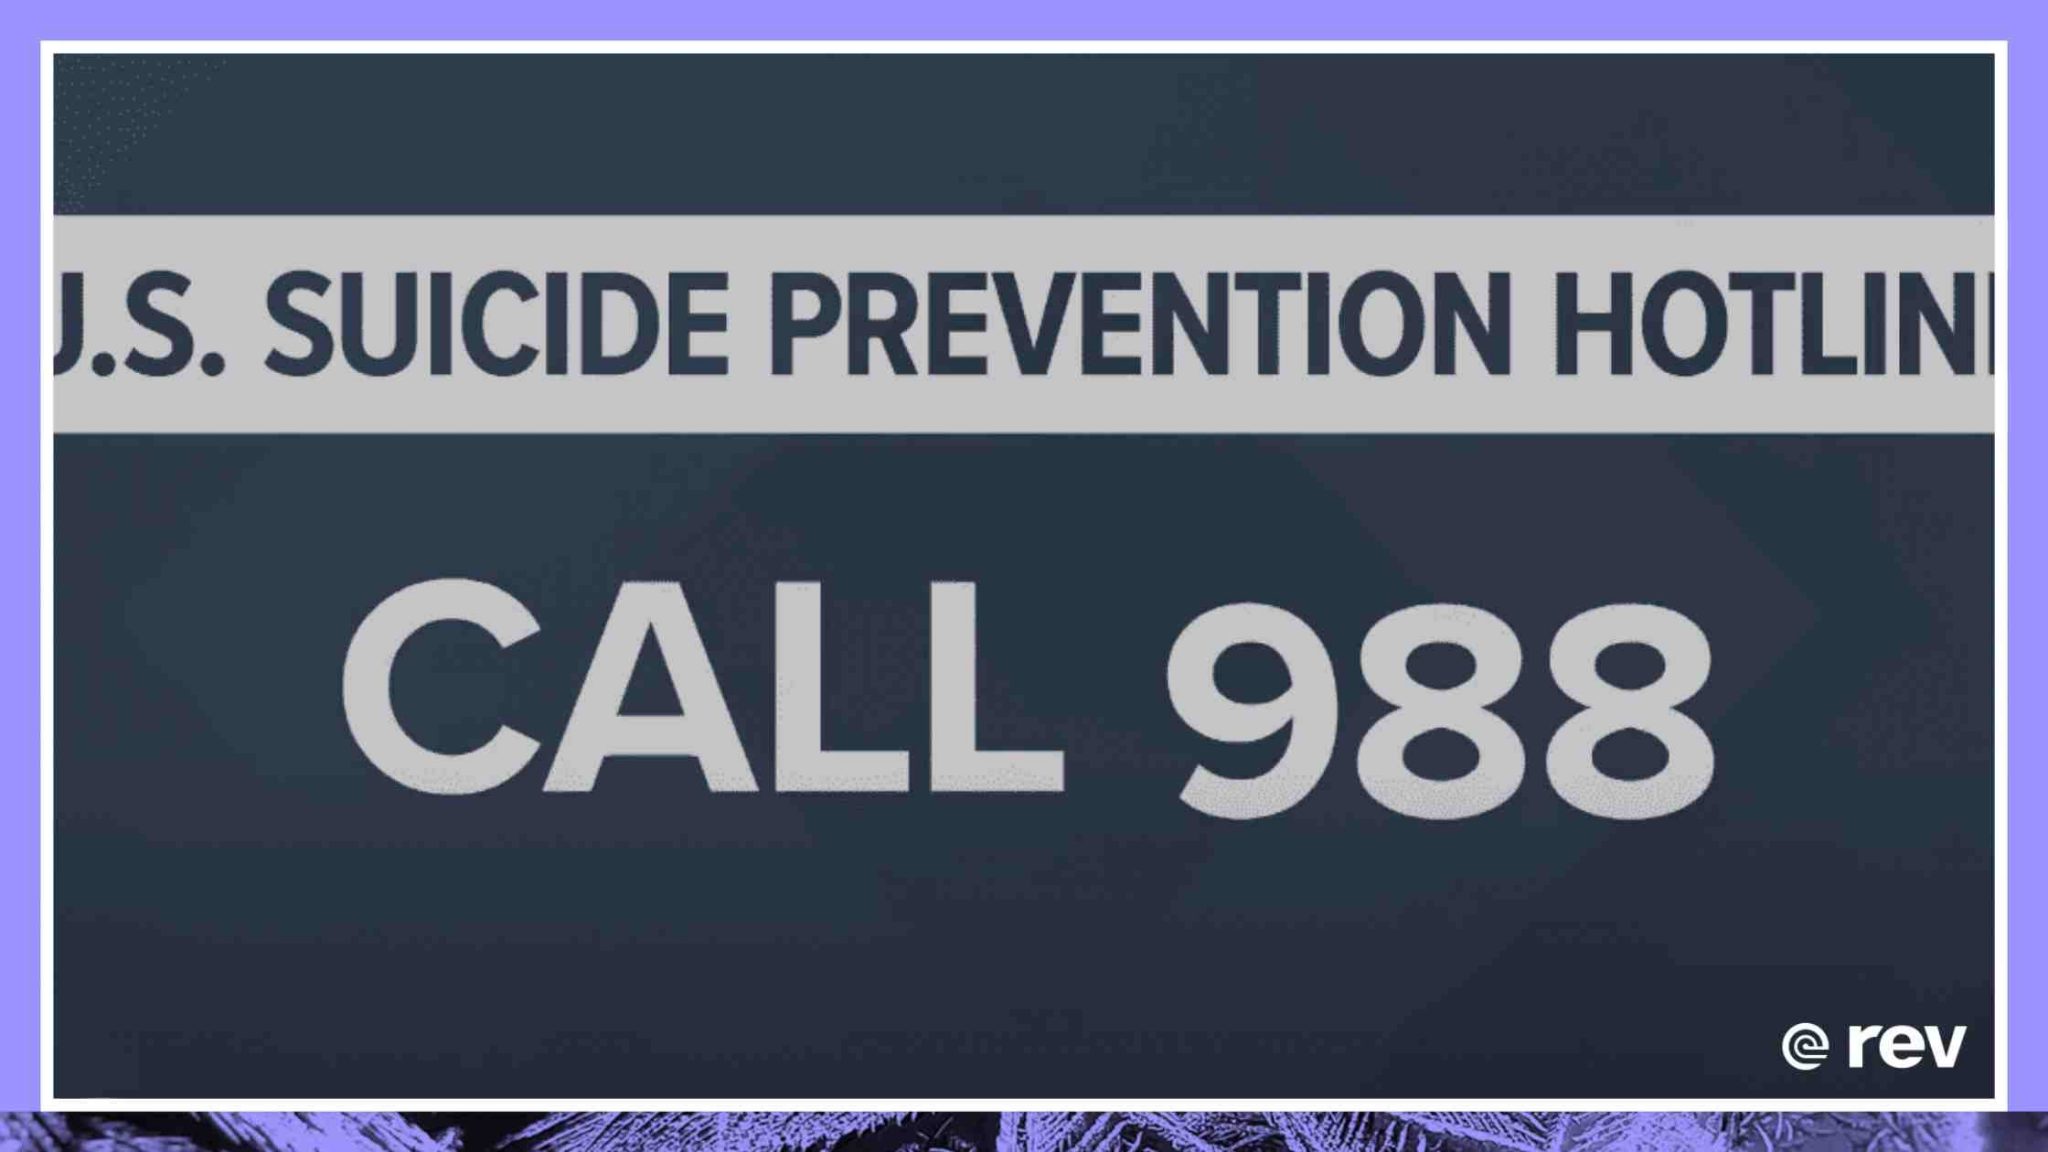 New 988 suicide prevention hotline launches nationwide this weekend Transcript